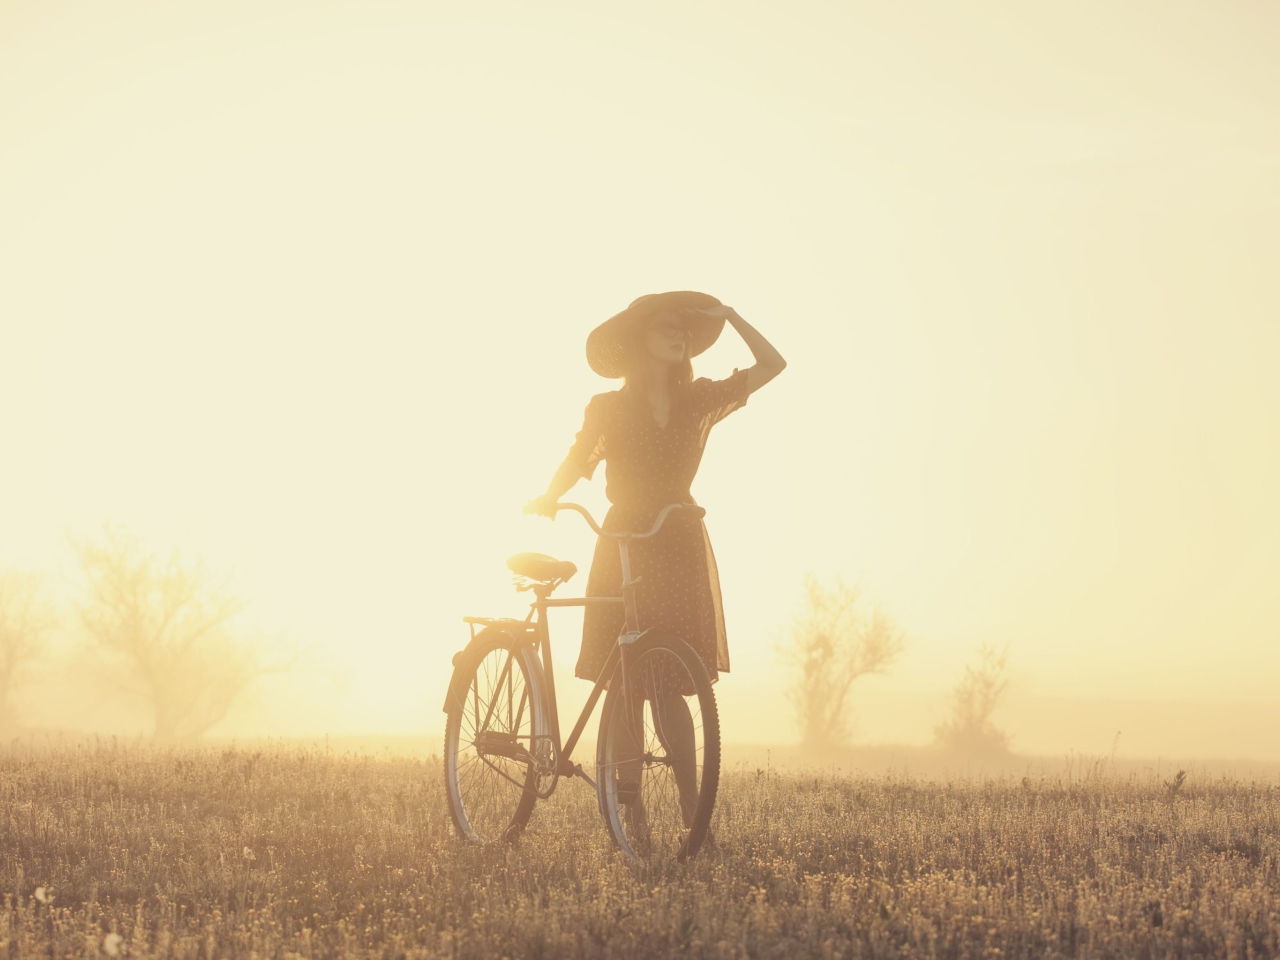 Girl And Bicycle On Misty Day screenshot #1 1280x960